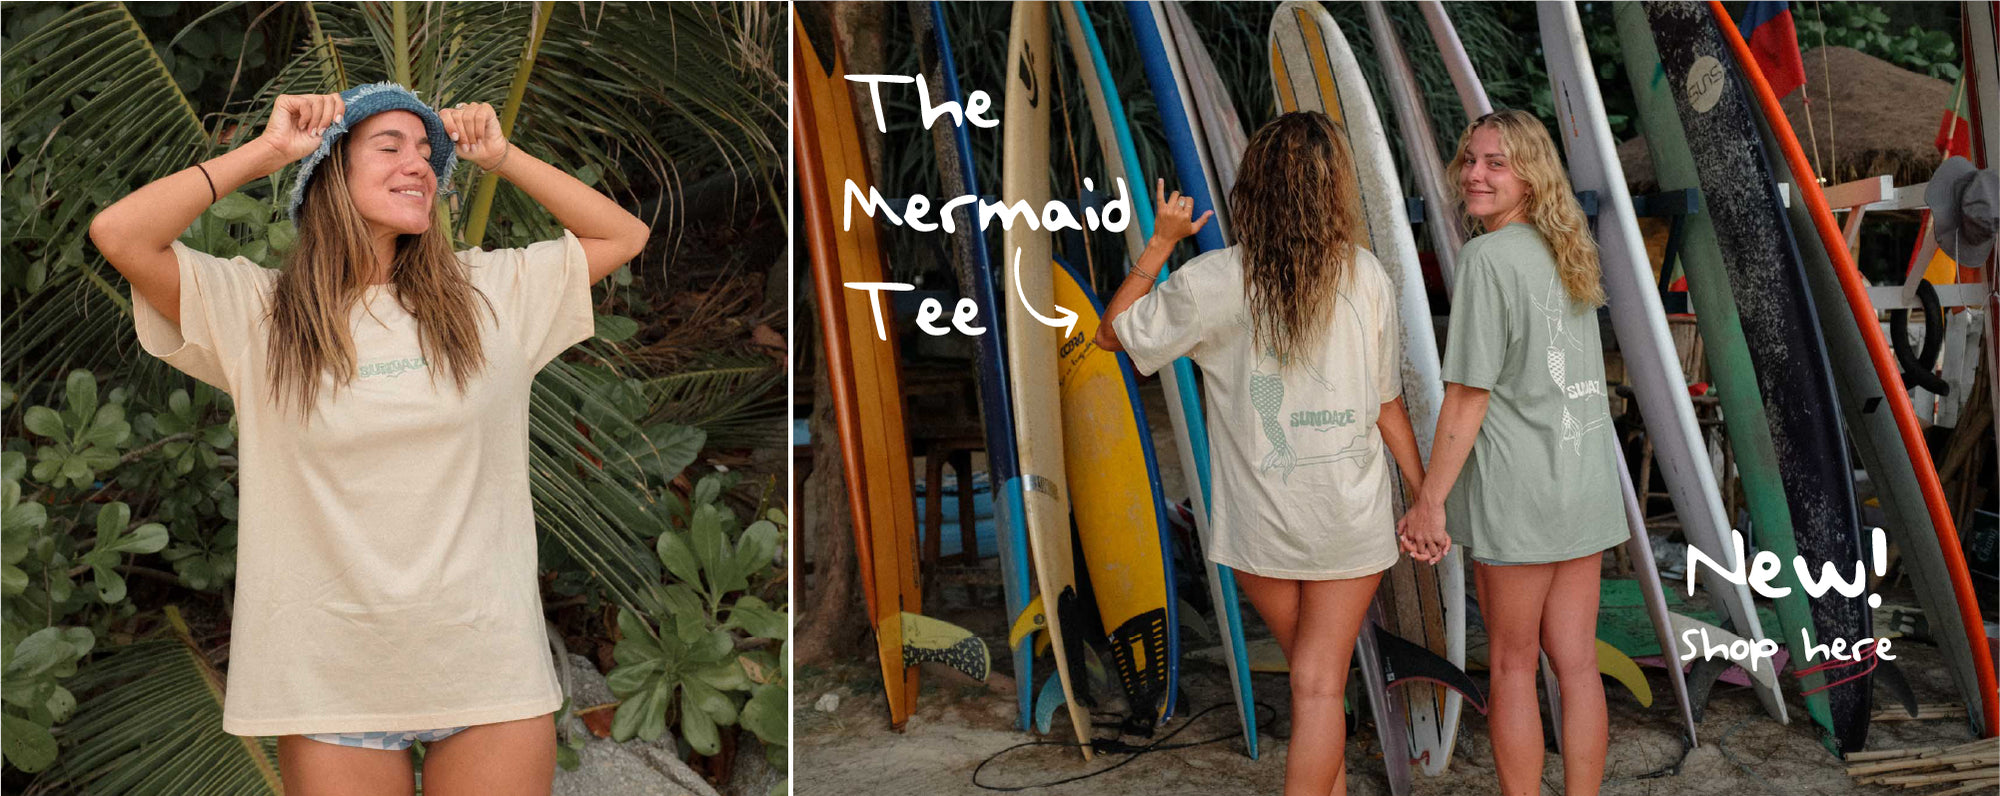 Woman holding a surf skate and wearing the mermaid tee